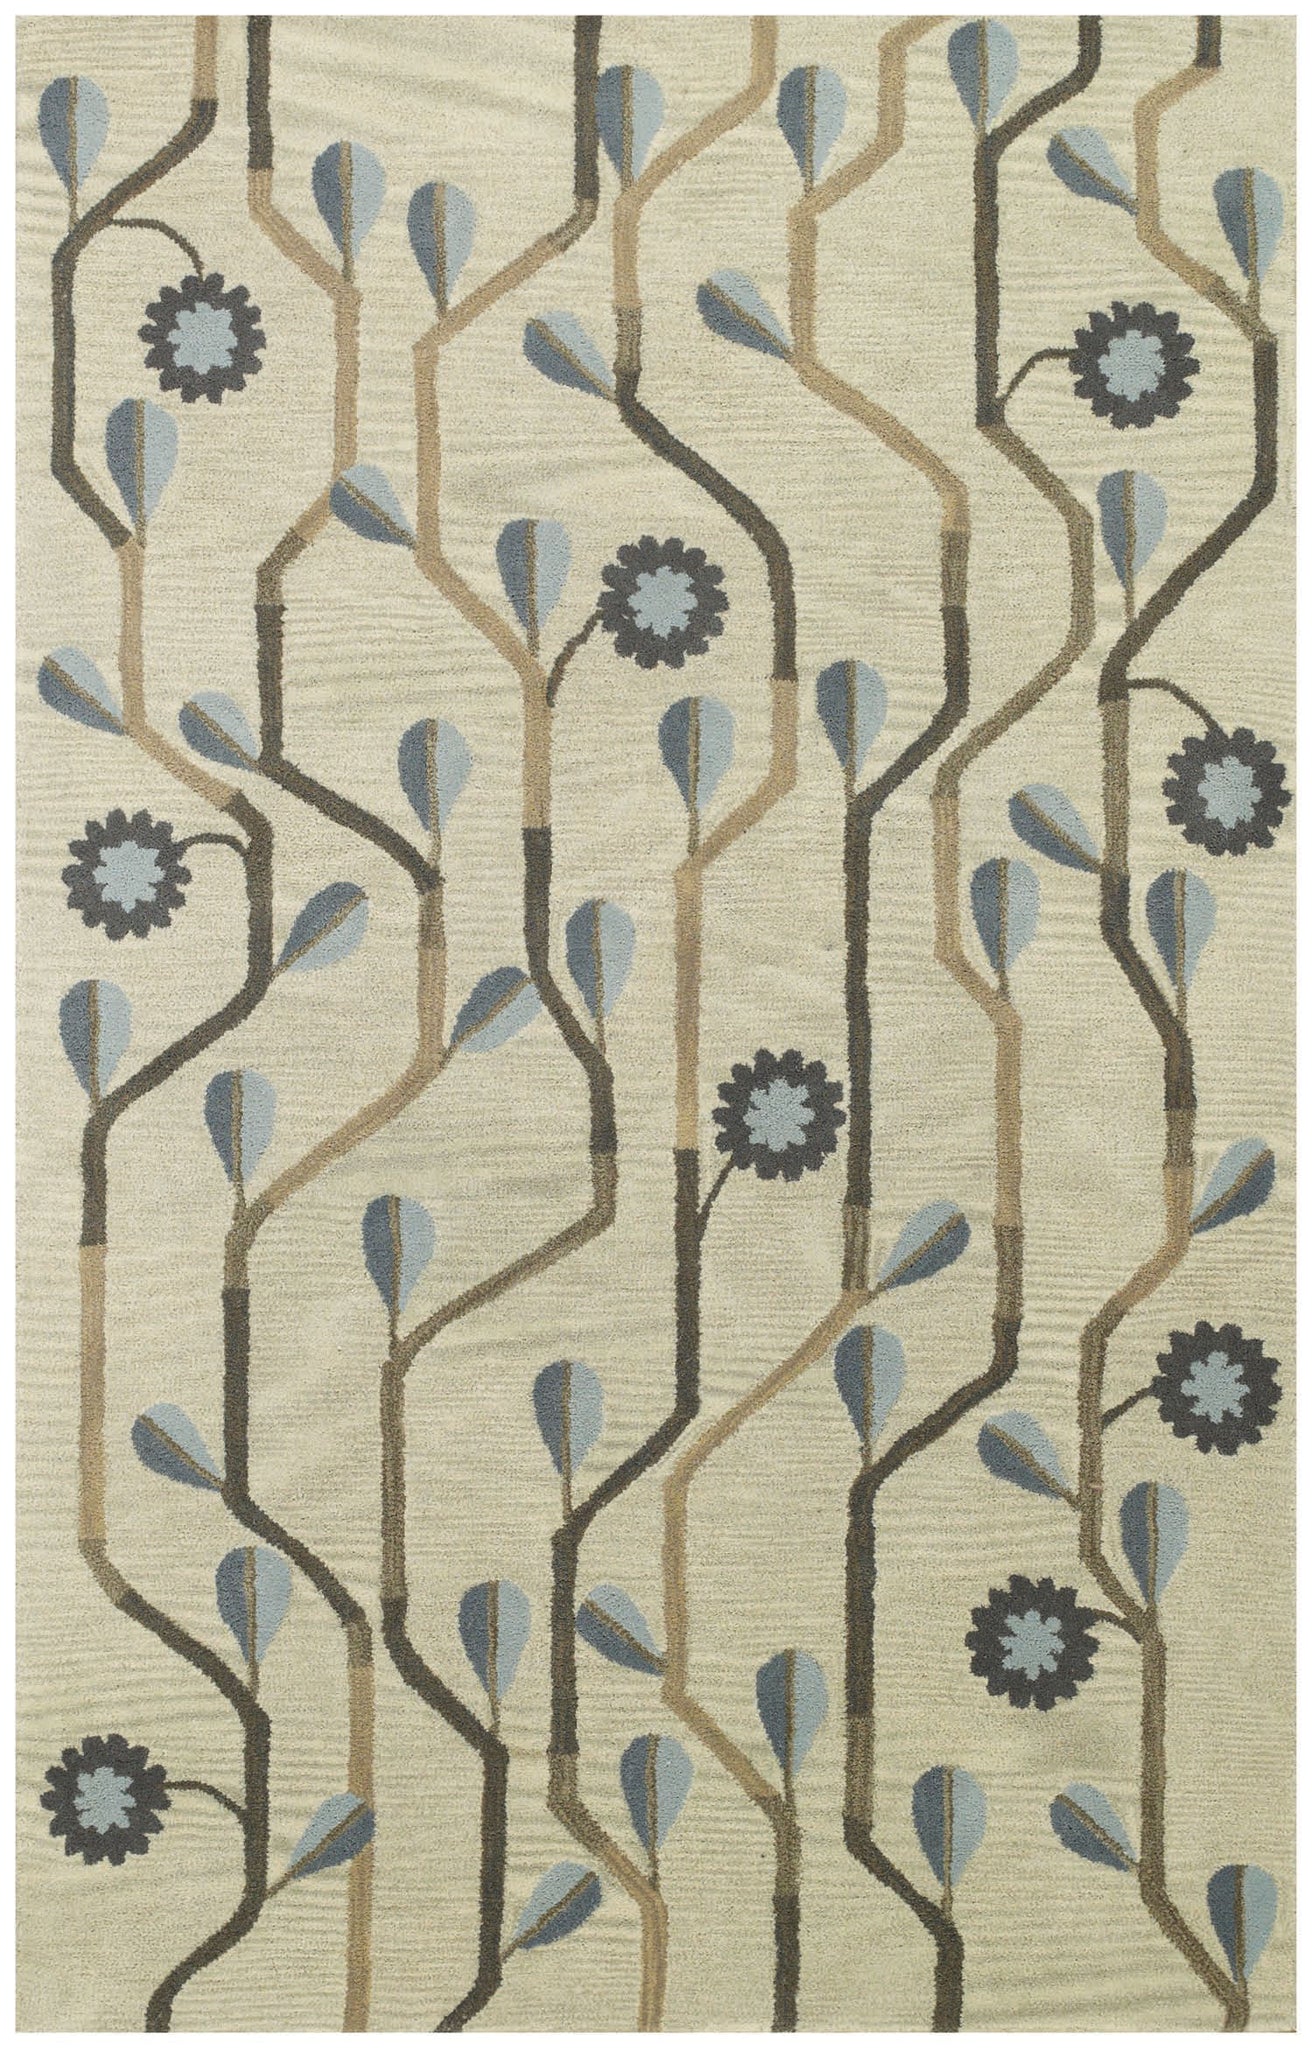 Capel Blue Bell Twining 3027 460 Area Rug main image